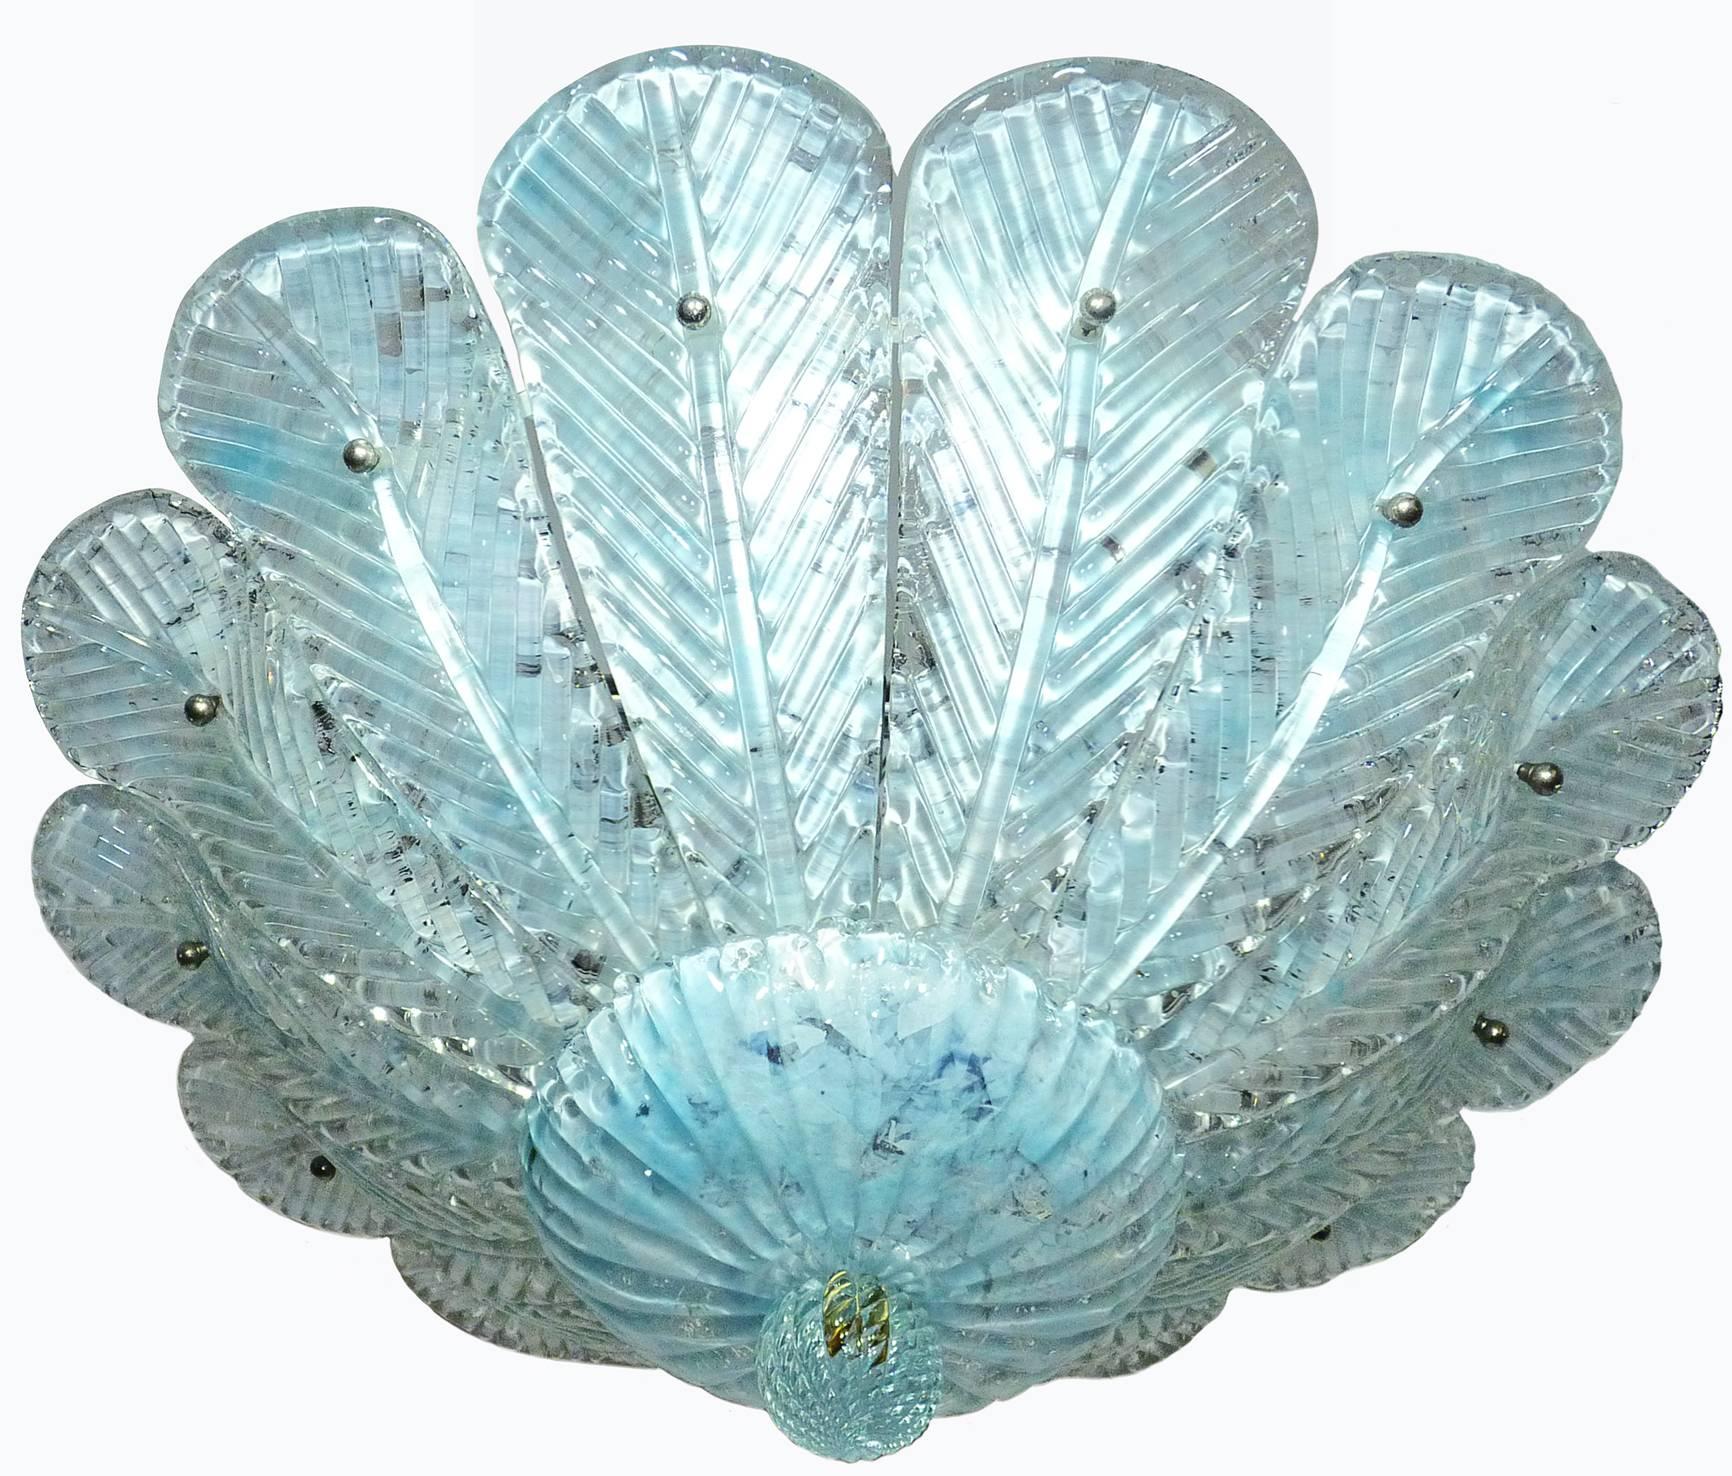 Gorgeous Italian midcentury Murano glass flush mount by Barovier & Toso with handblown textured glass
Measures: 
Diameter 66 cm
Height 40 cm
Eight light bulbs E 14/ Good working condition/European wiring.
Weight - 15 Kg/ 33 lb.
Your item will